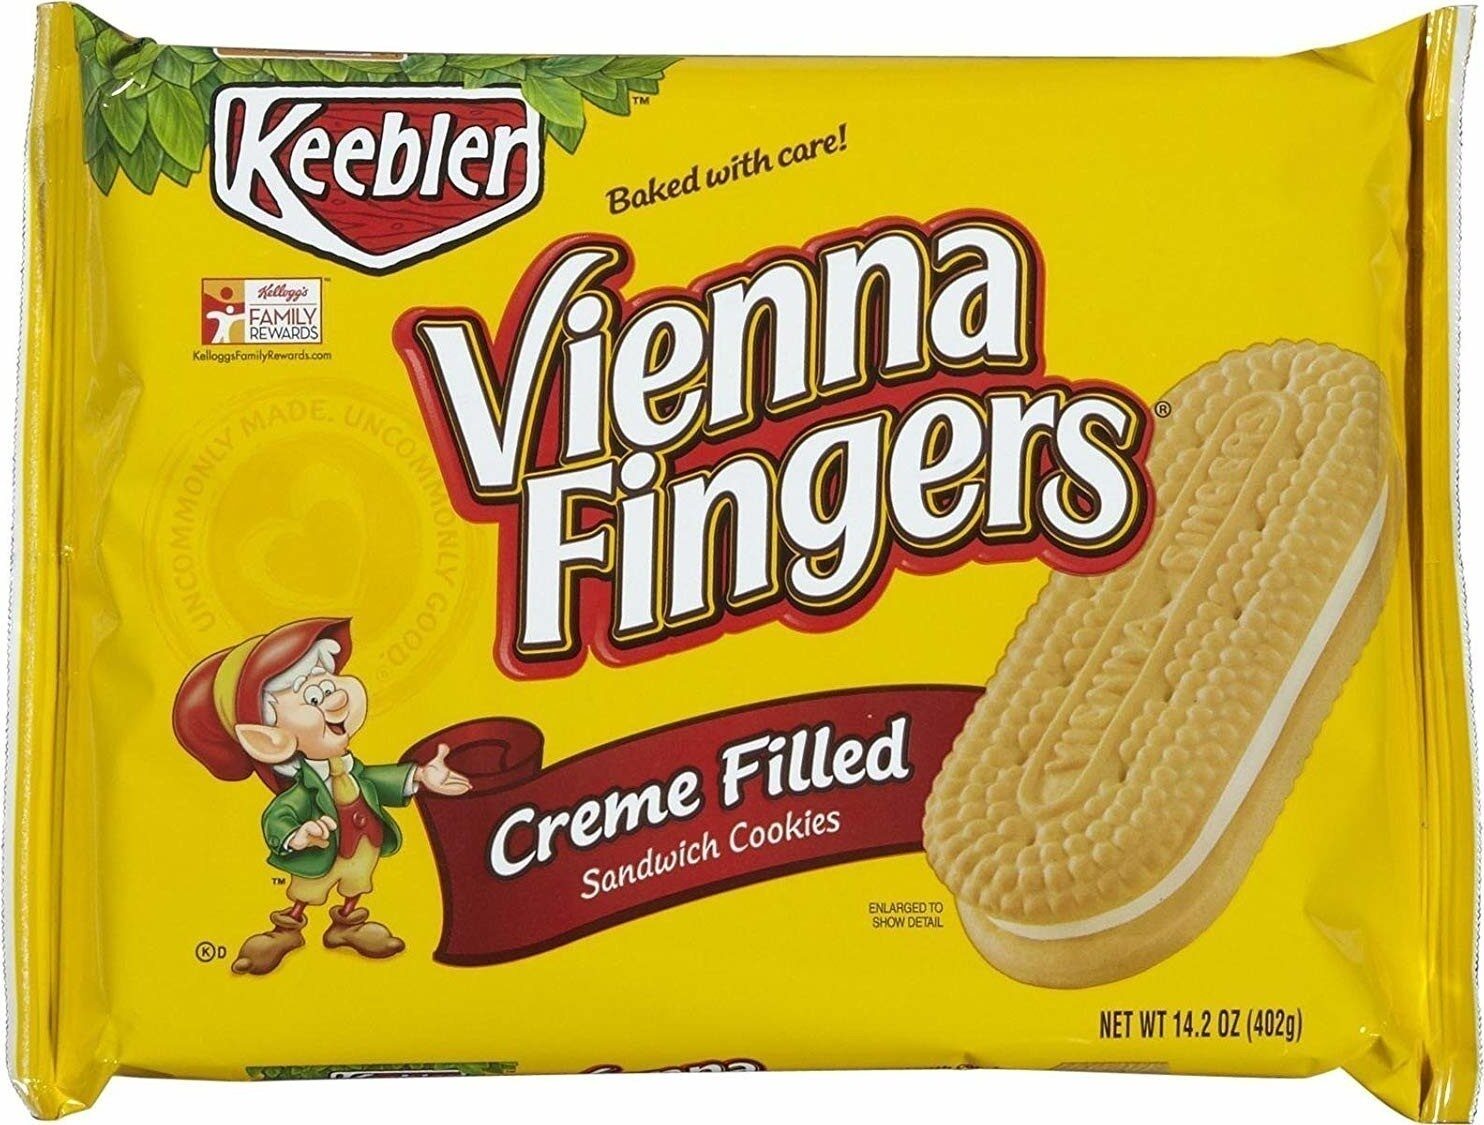 Vienna fingers creme filled sandwich cookies - Product